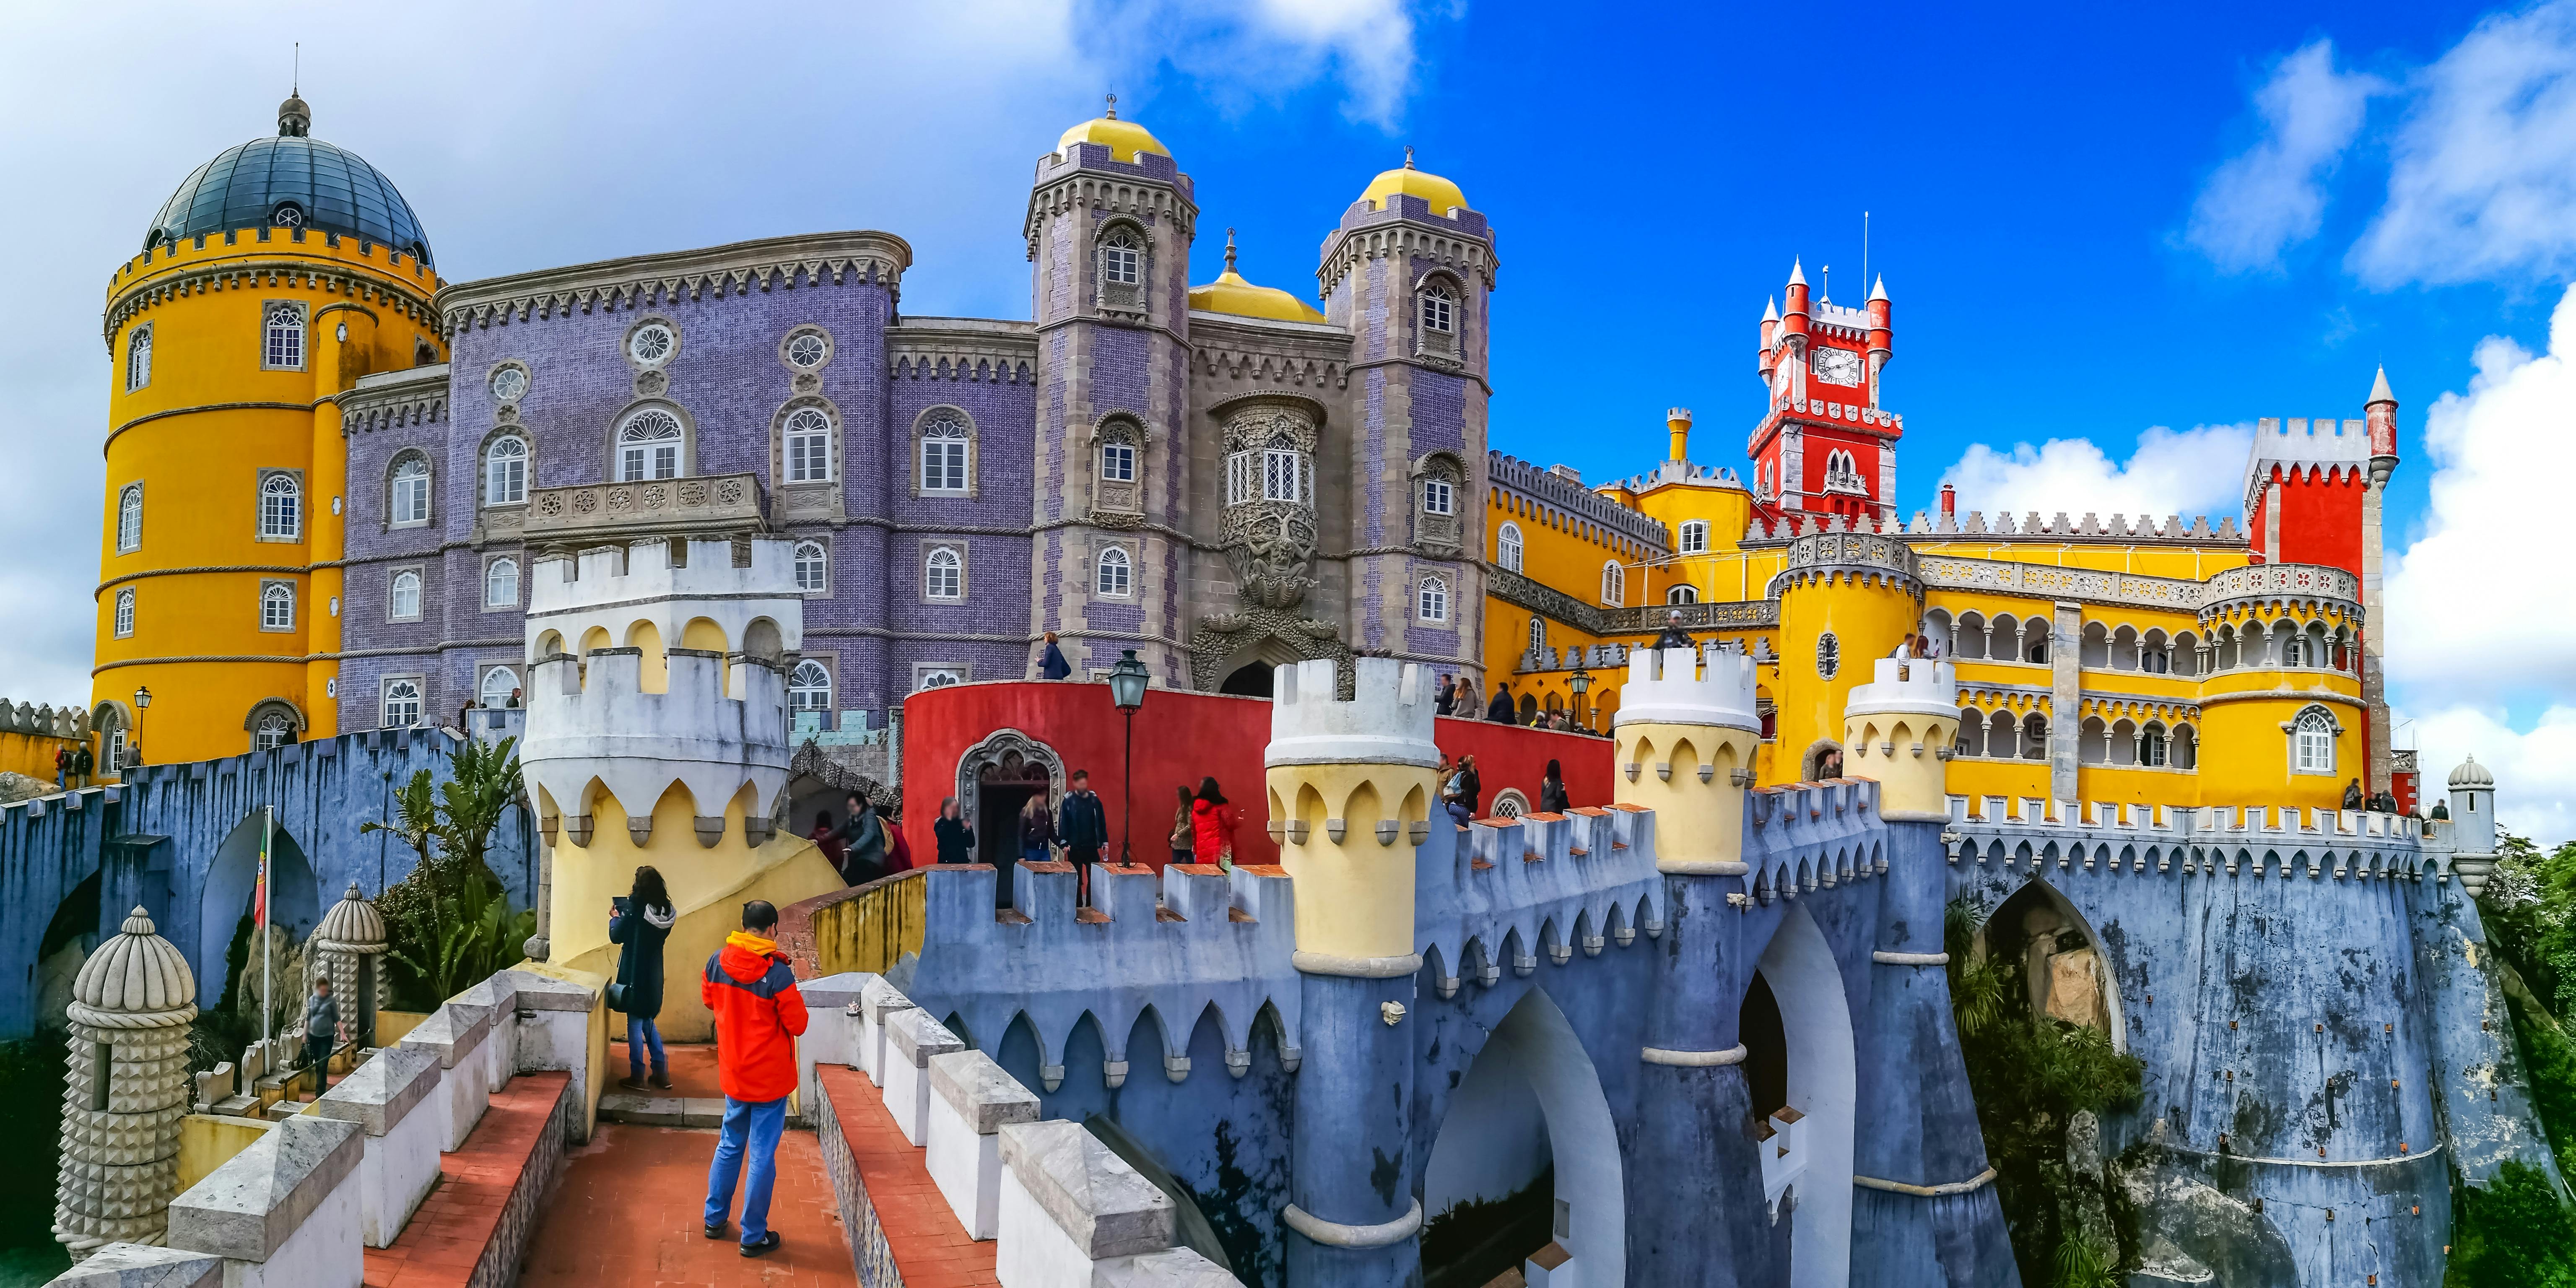 Sintra full-day tour with Quinta da Regaleira and Pena Palace